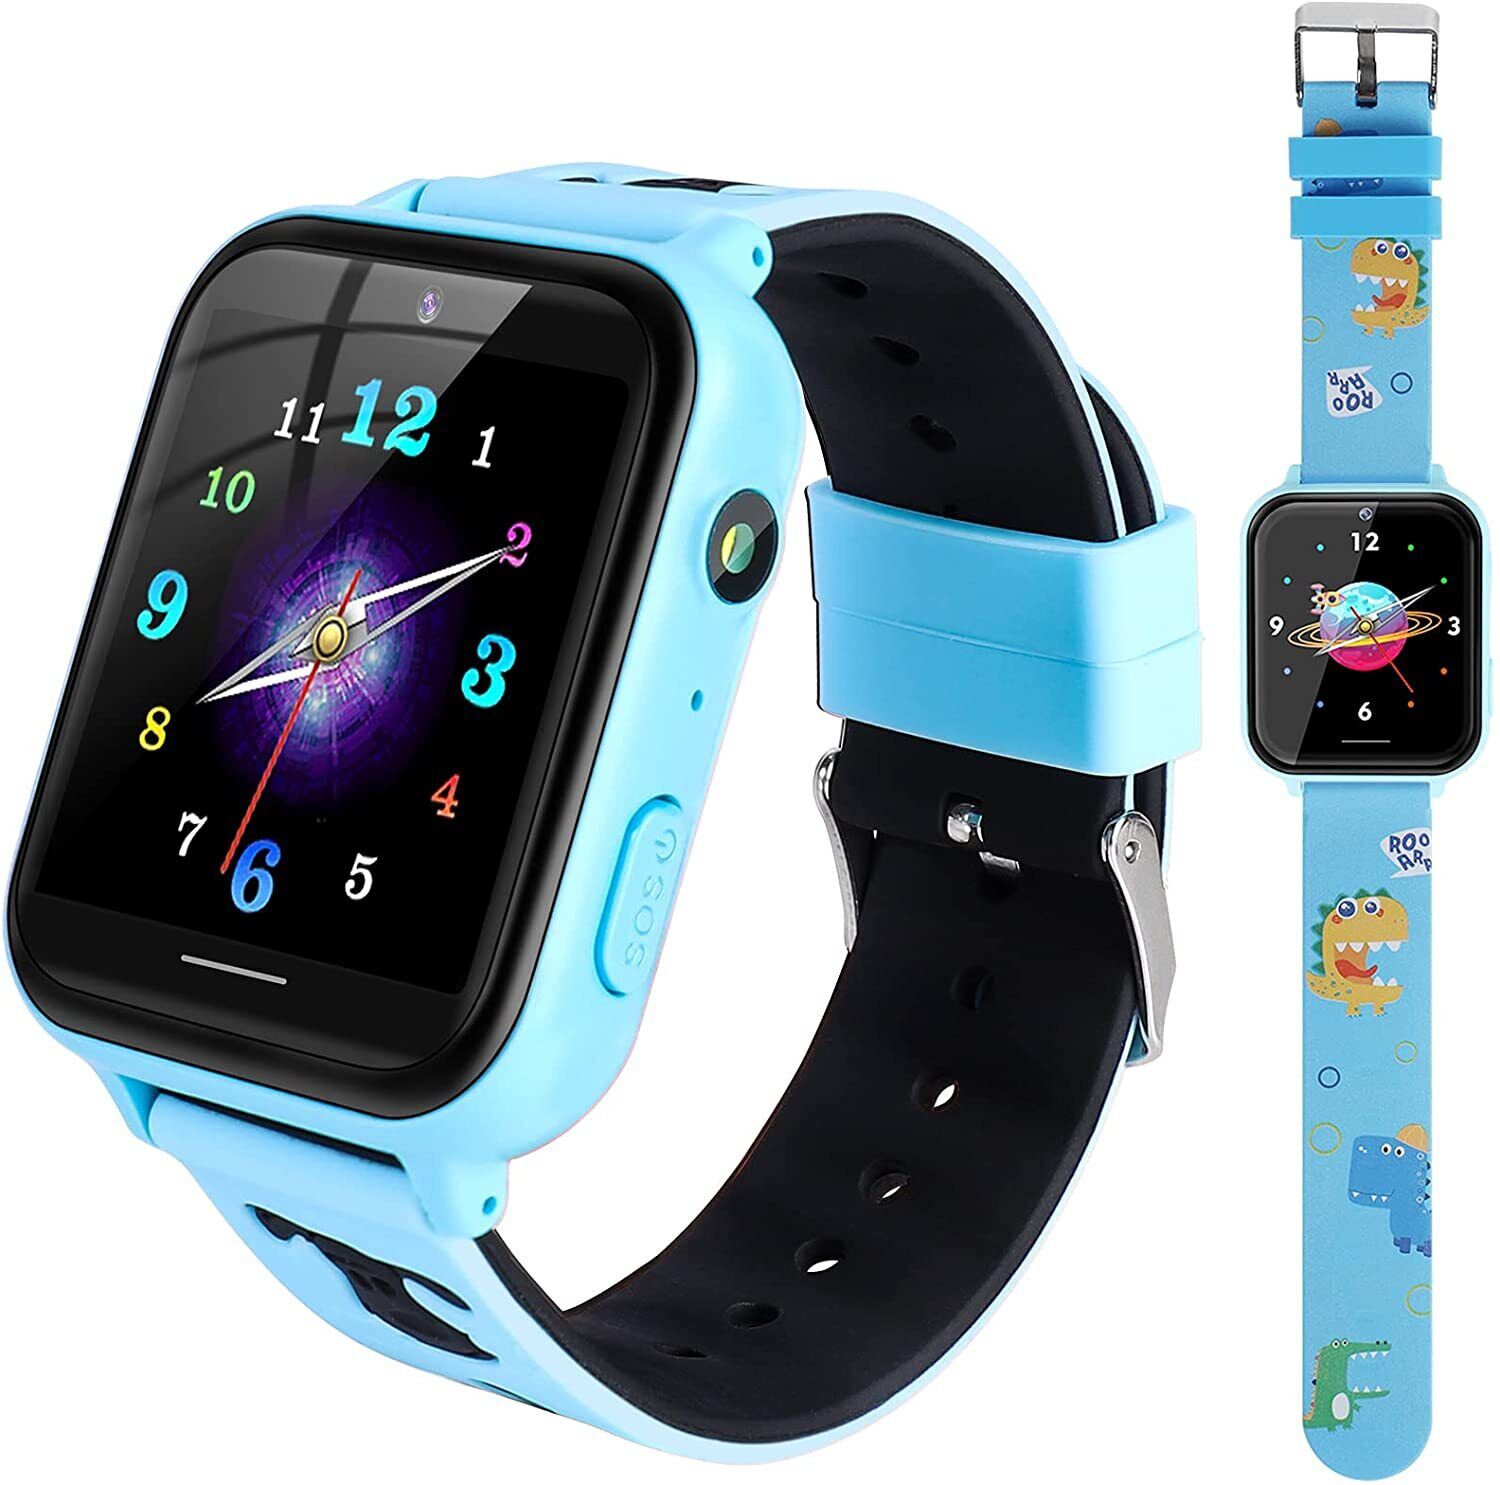 Kids Smart Watch with 10 Games SOS Call Alarm for 4-12 Boys Girls Birthday Gift